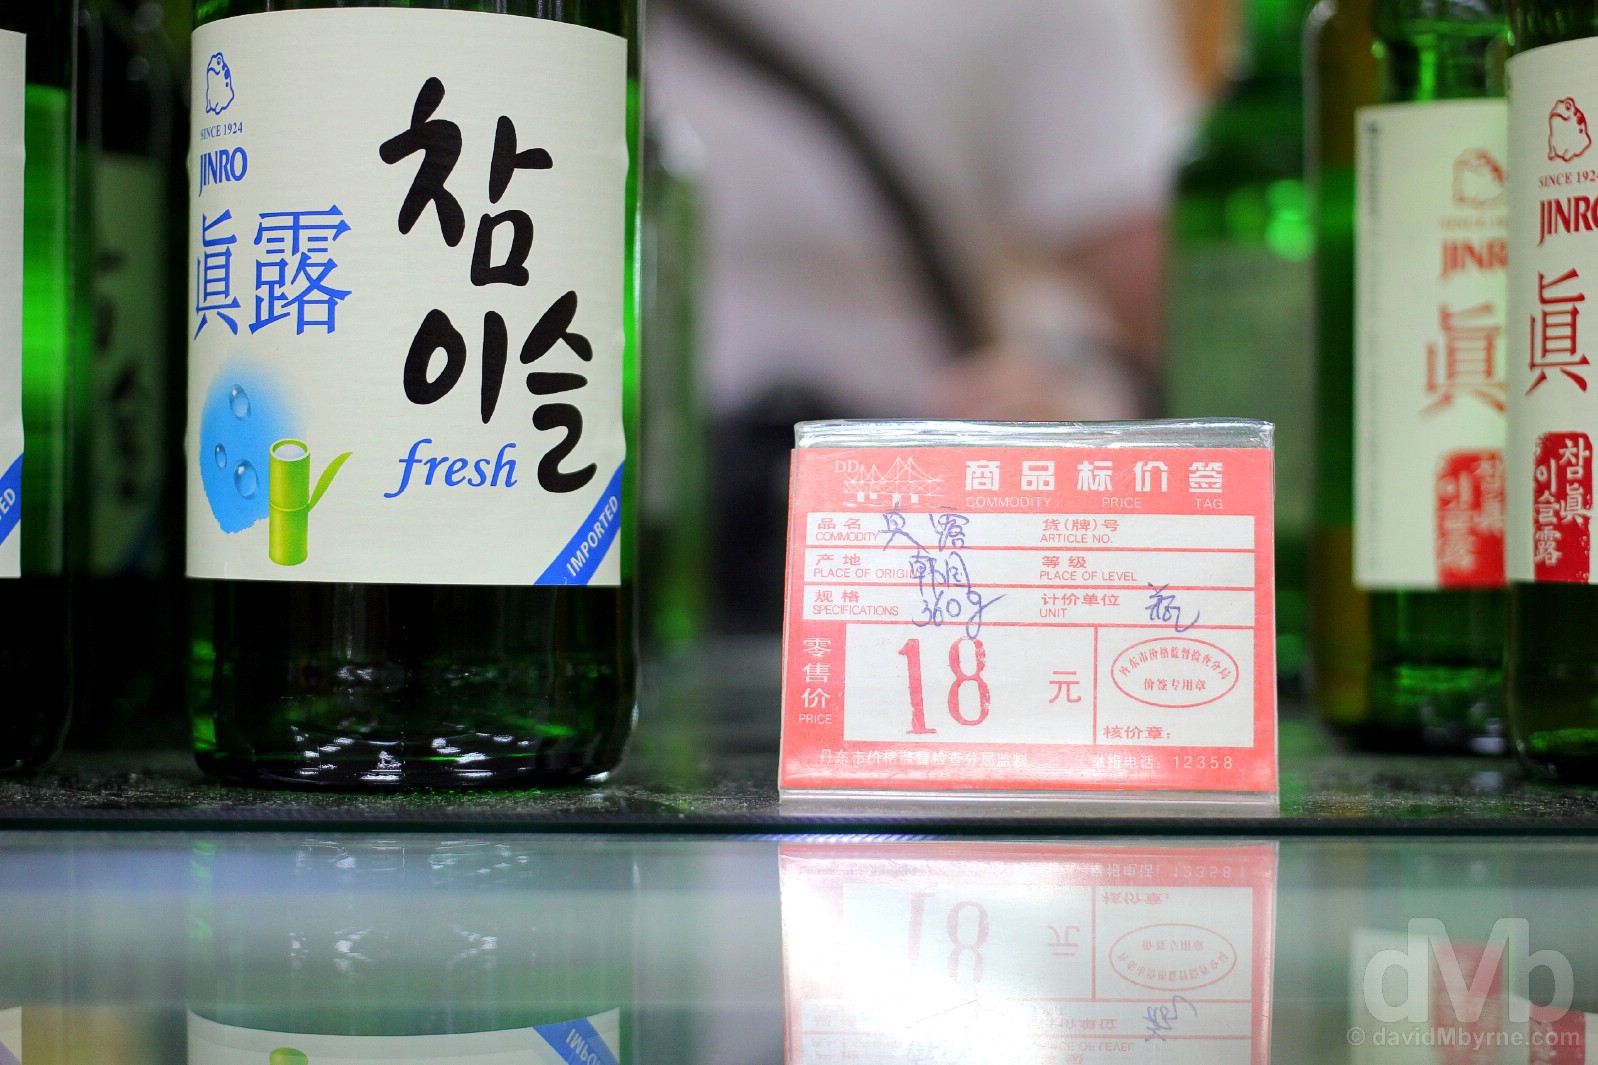 Korean soju for sale in a store in Dandong, Liaoning province, China. August 13, 2017.